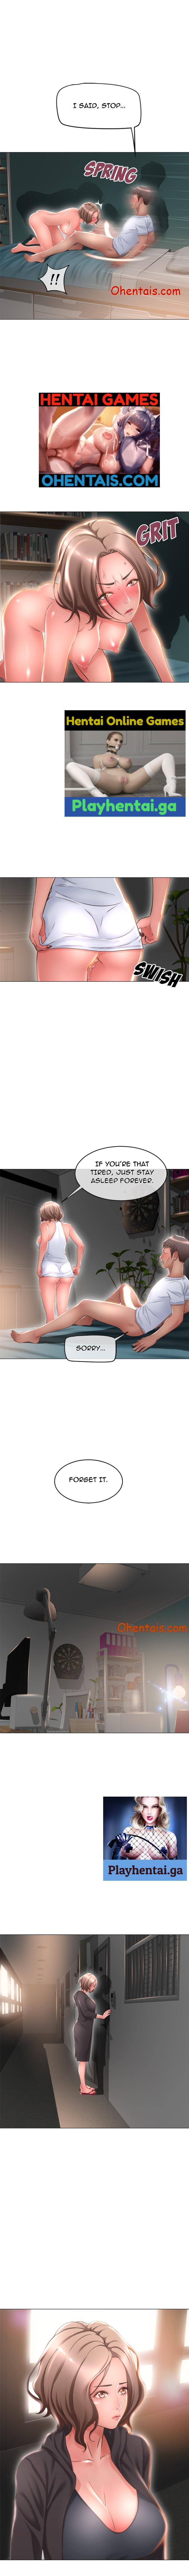 Amature Sex Tapes Close, but Far | Do it next door Ch. 17-18 Anal Play - Page 6